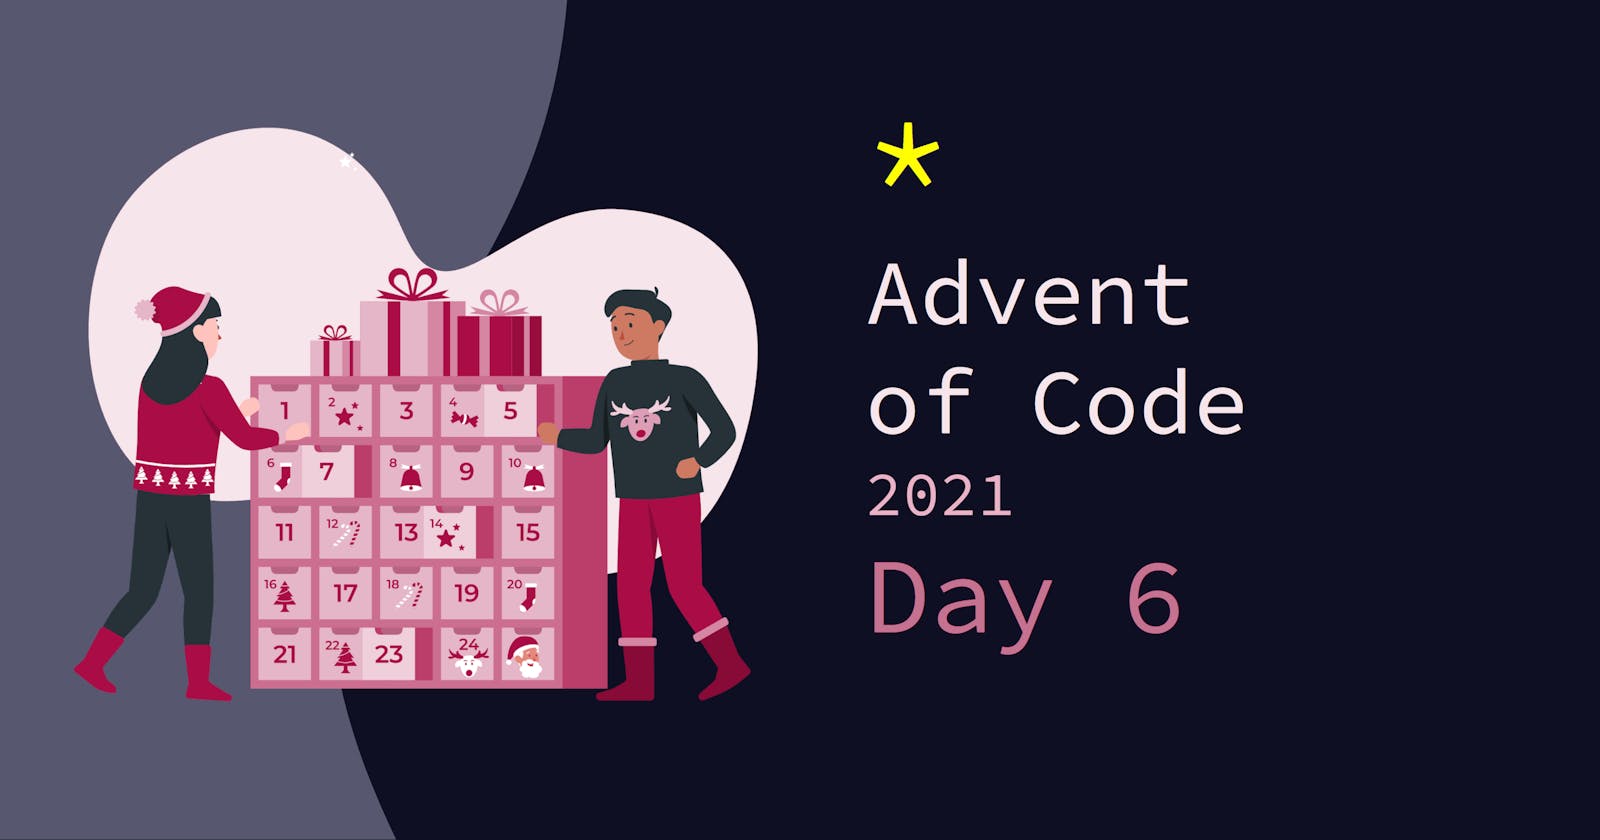 Advent of Code 2021: Day 6